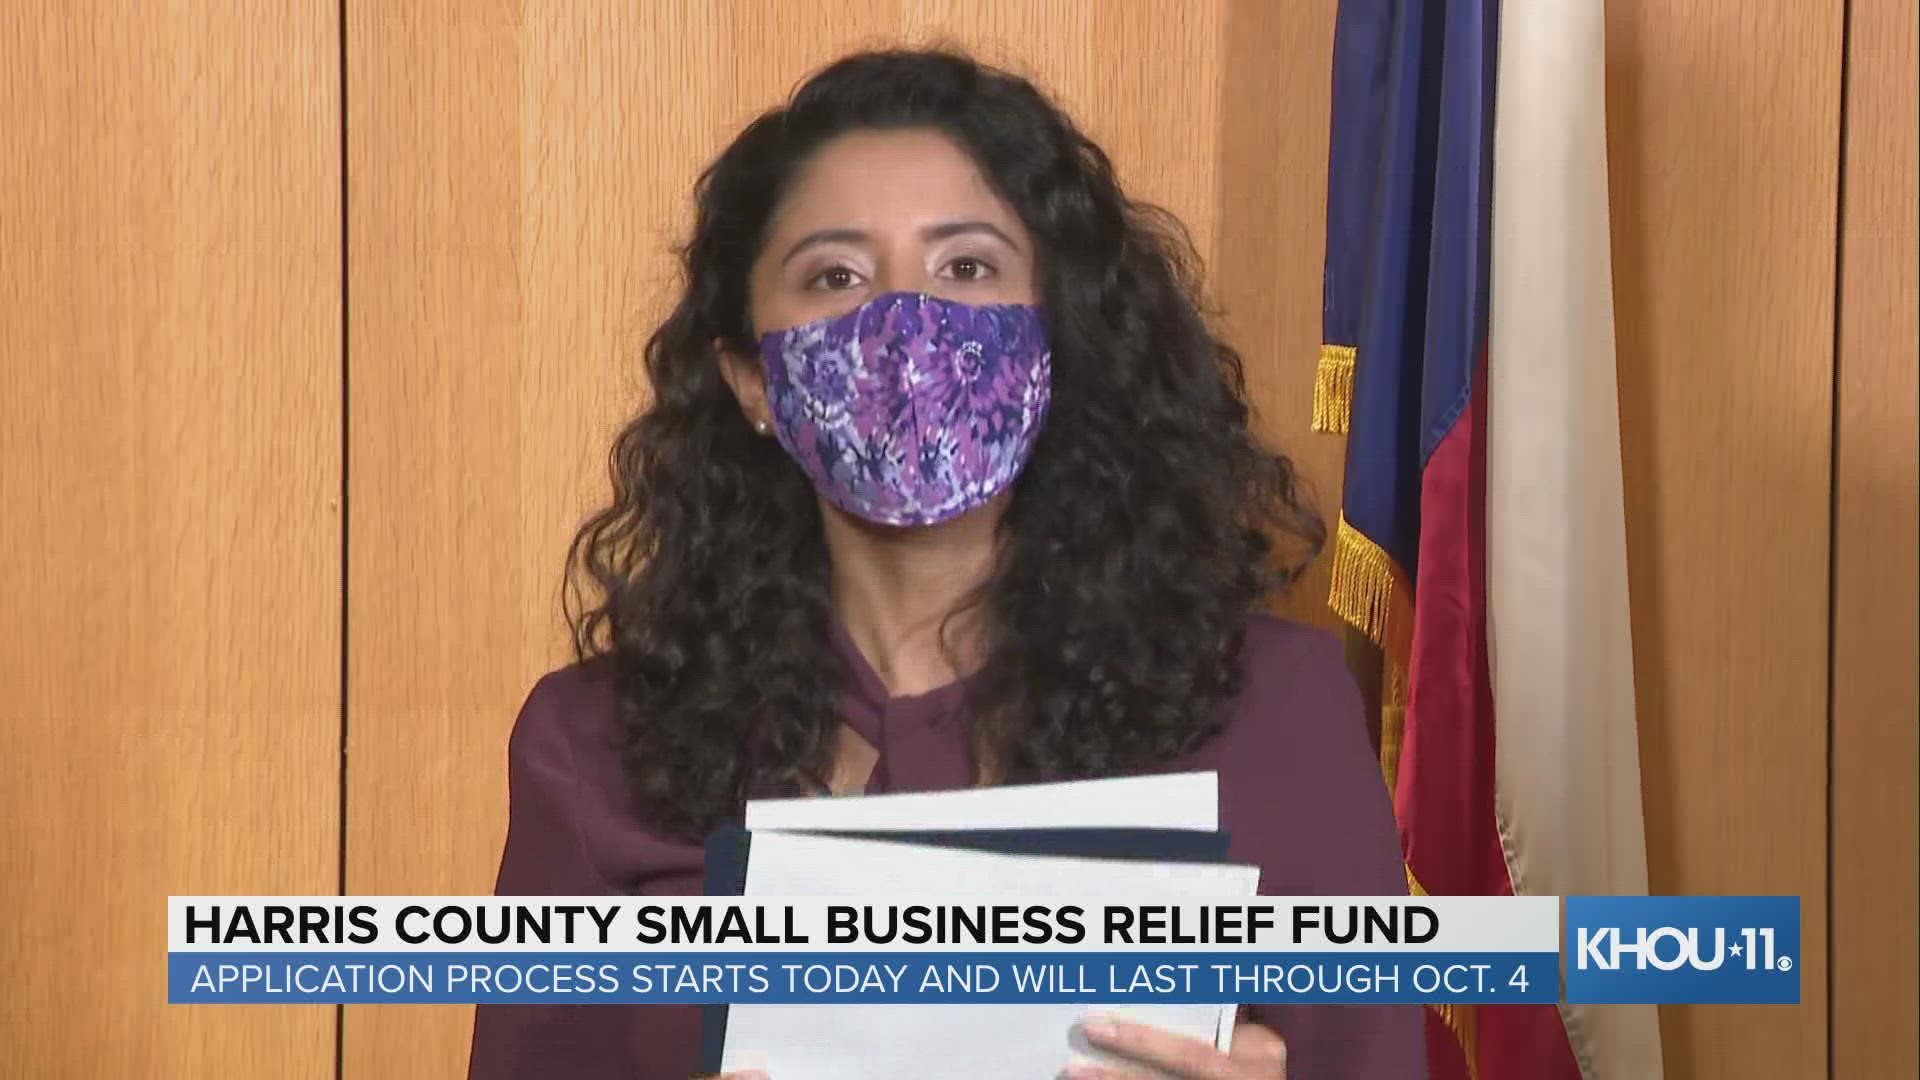 The application process is now open for small business owners to apply for a grant with the Harris County Small Business Relief Fund.